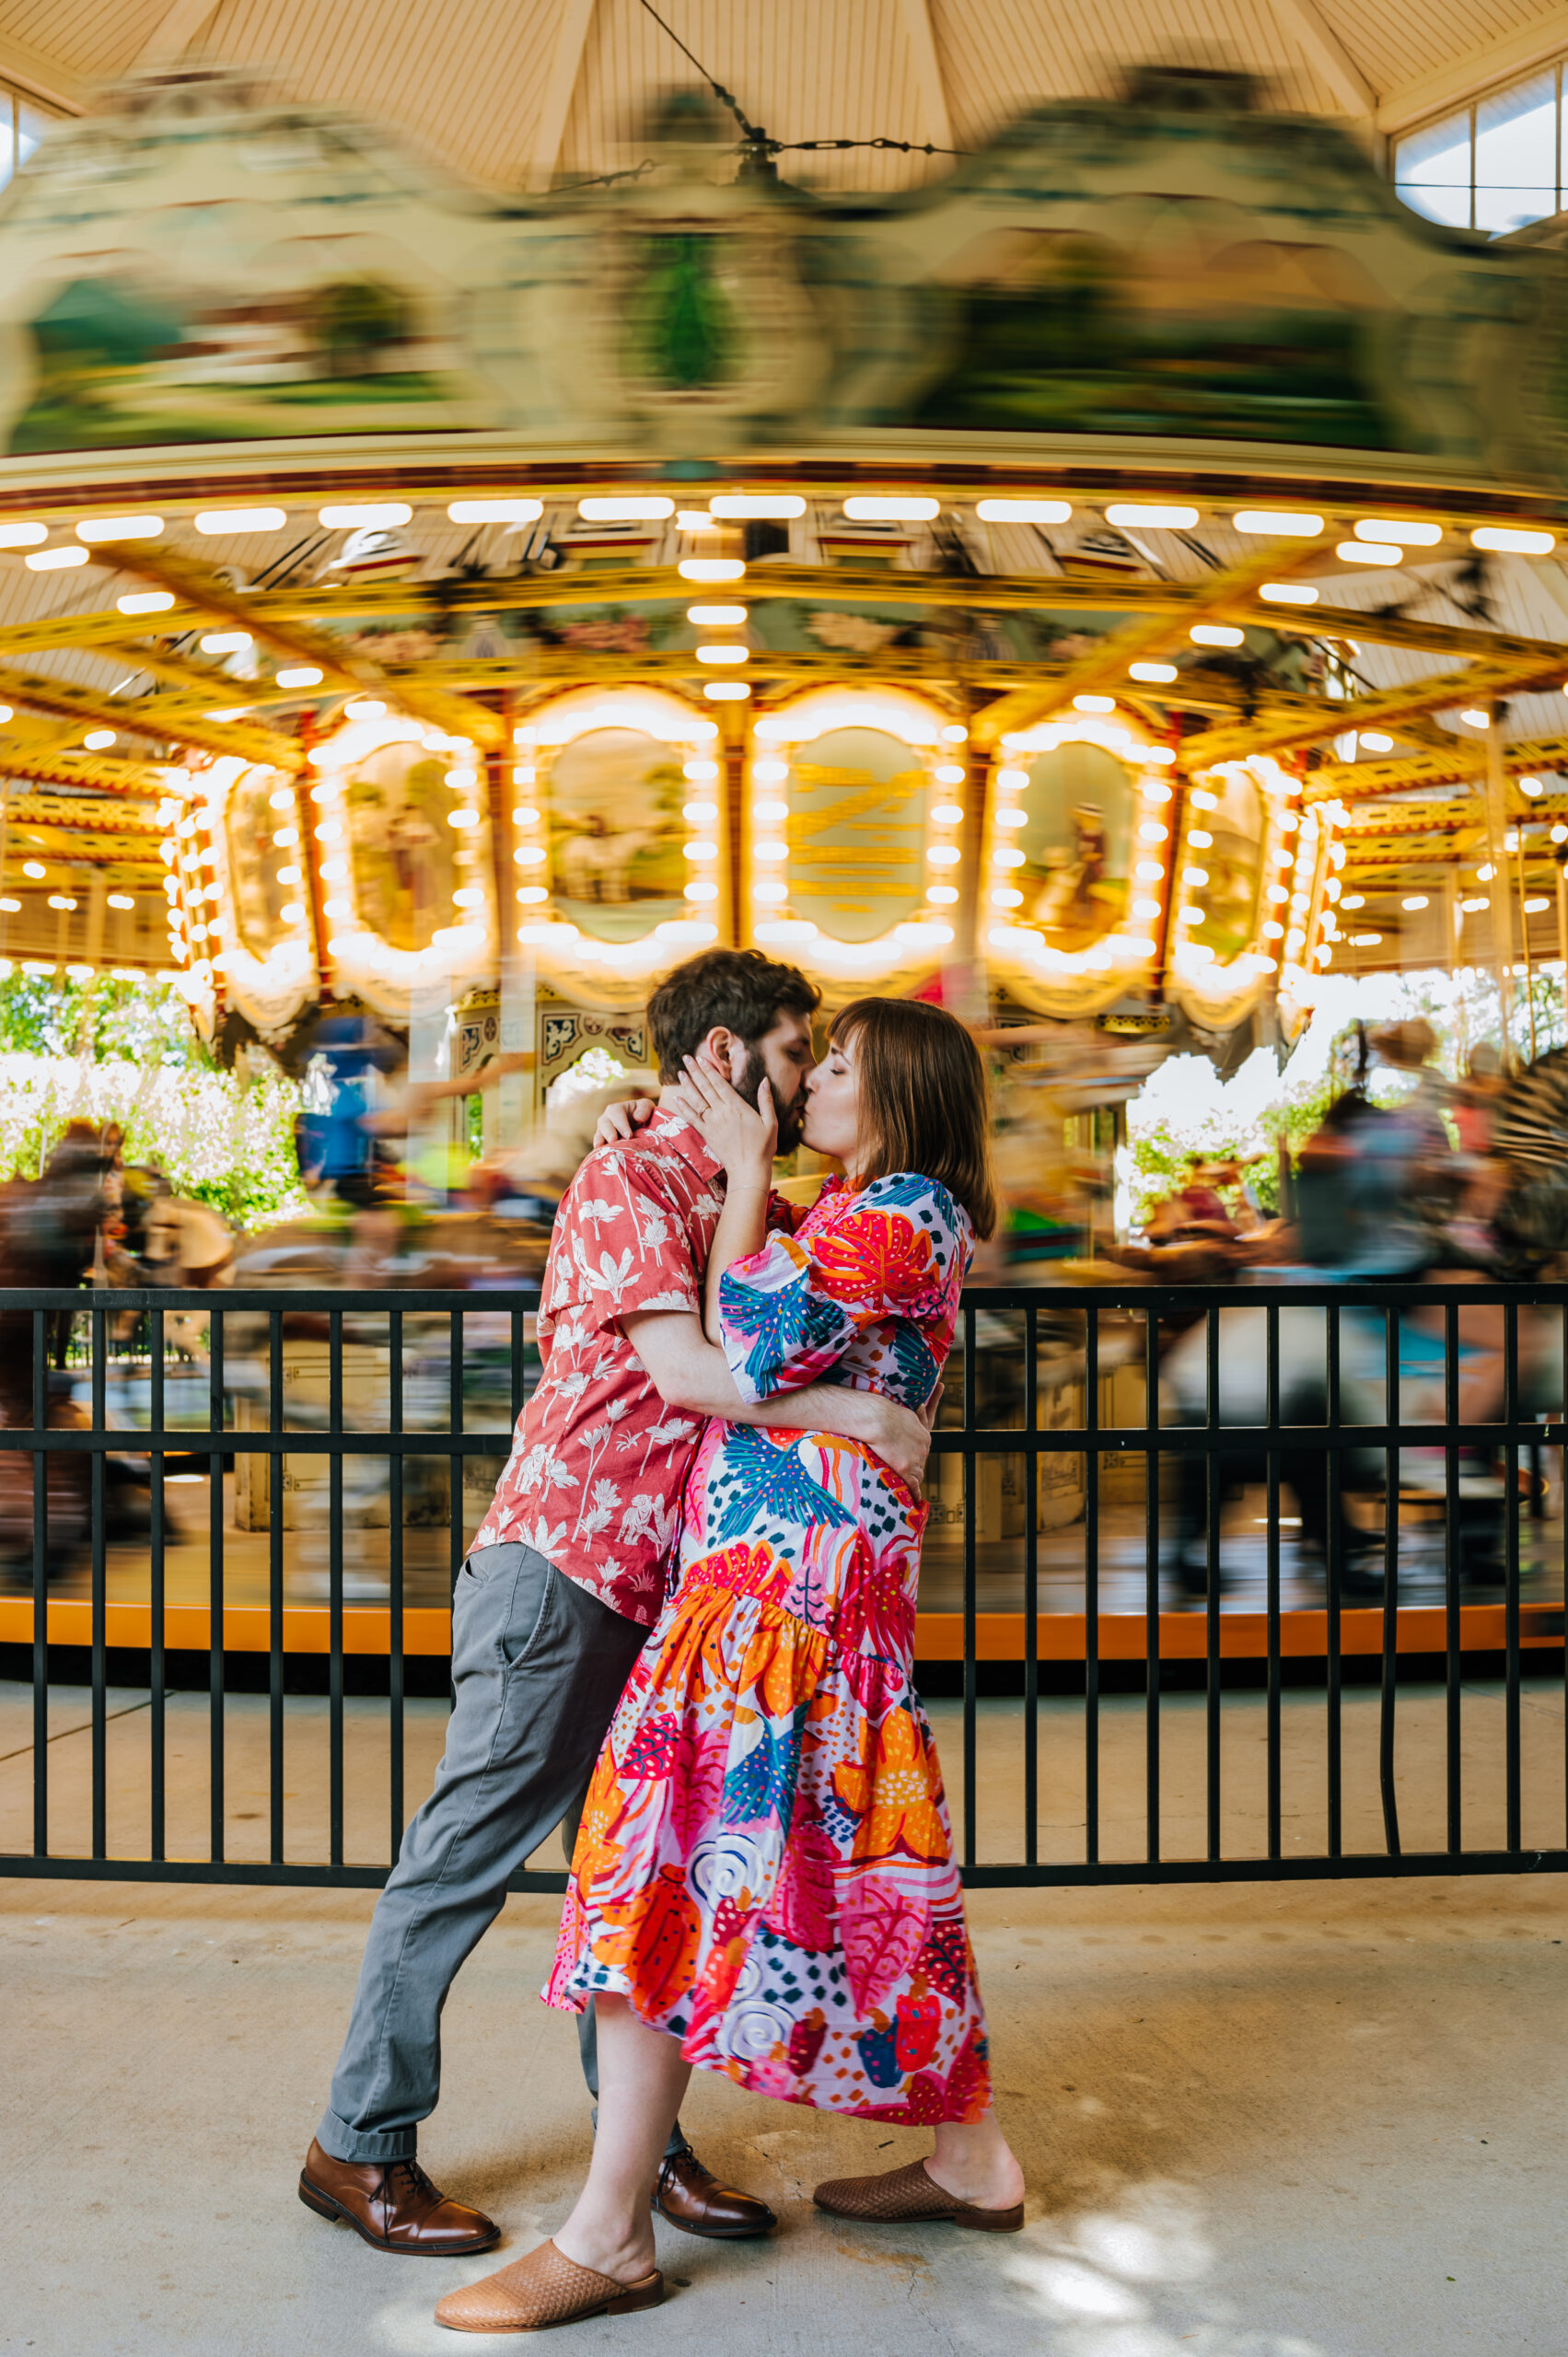 A couple wearing colorful clothing stops for a kiss in front of a spinning carousel